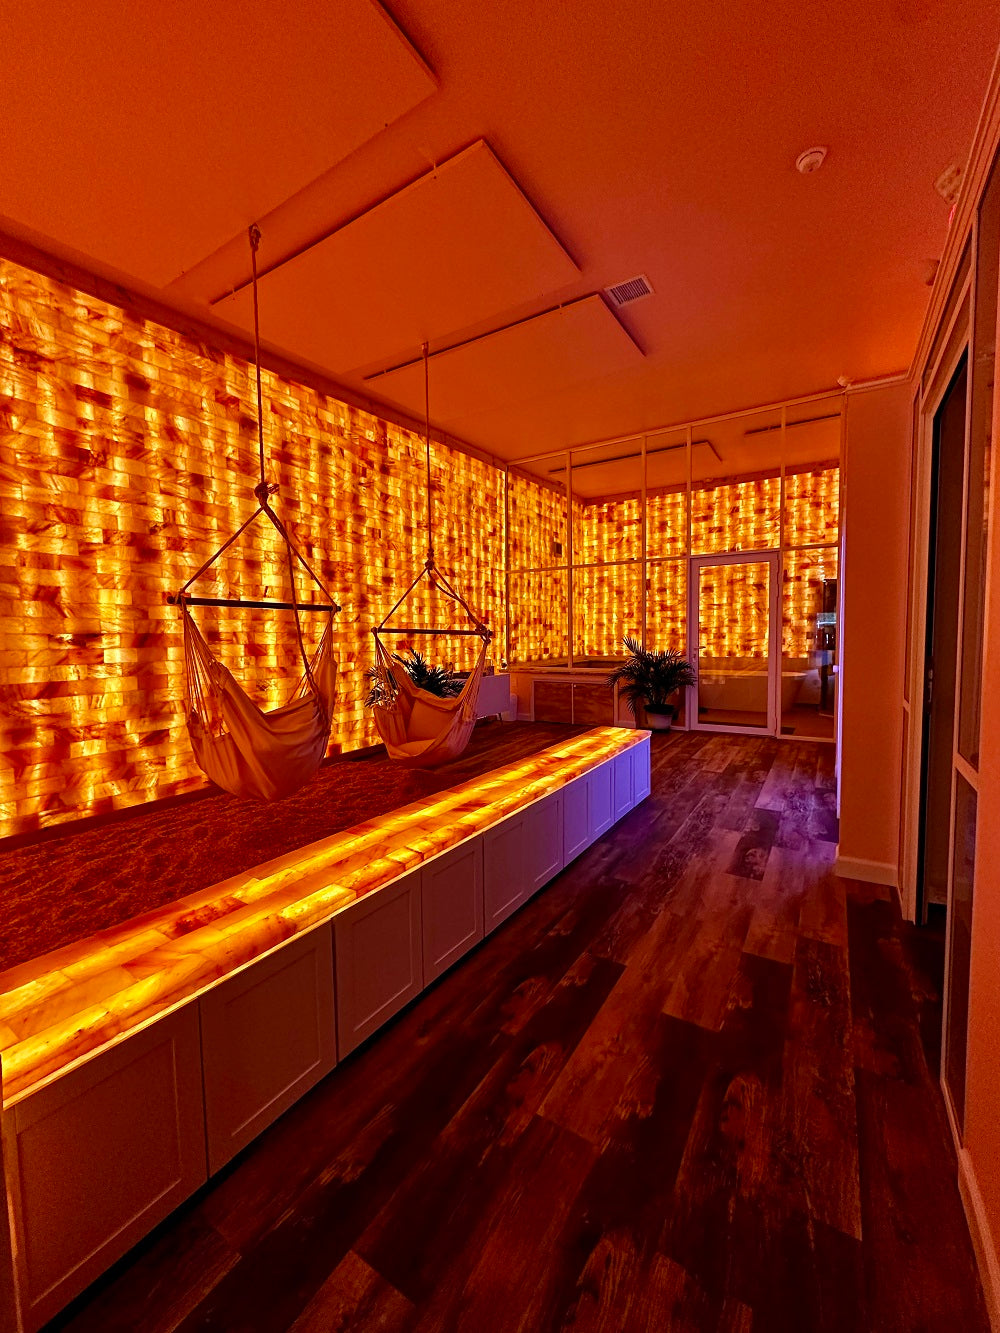 A warmly lit interior room with Himalayan salt walls creates a soft glow. Two hammock chairs hang over crushed Himalayan salt.  A long, illuminated Himalayan salt bench runs along the middle of the room, contrasting with the dark wooden floor. The atmosphere is serene and inviting, evoking a sense of relaxation.